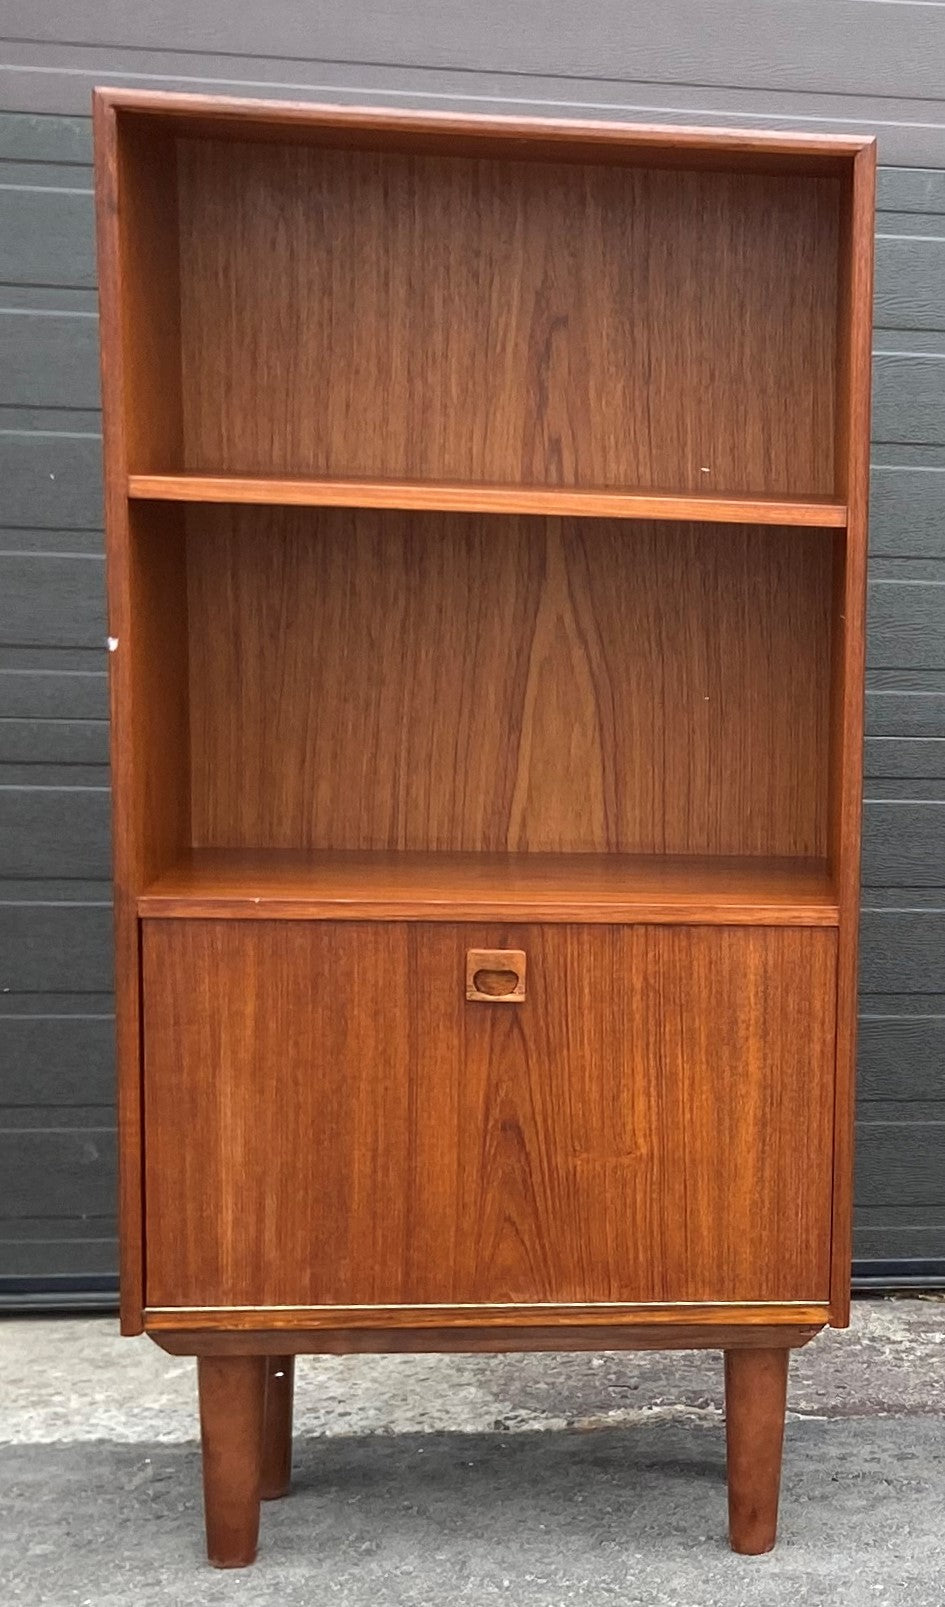 REFINISHED Danish MCM Bar Cabinet, compact